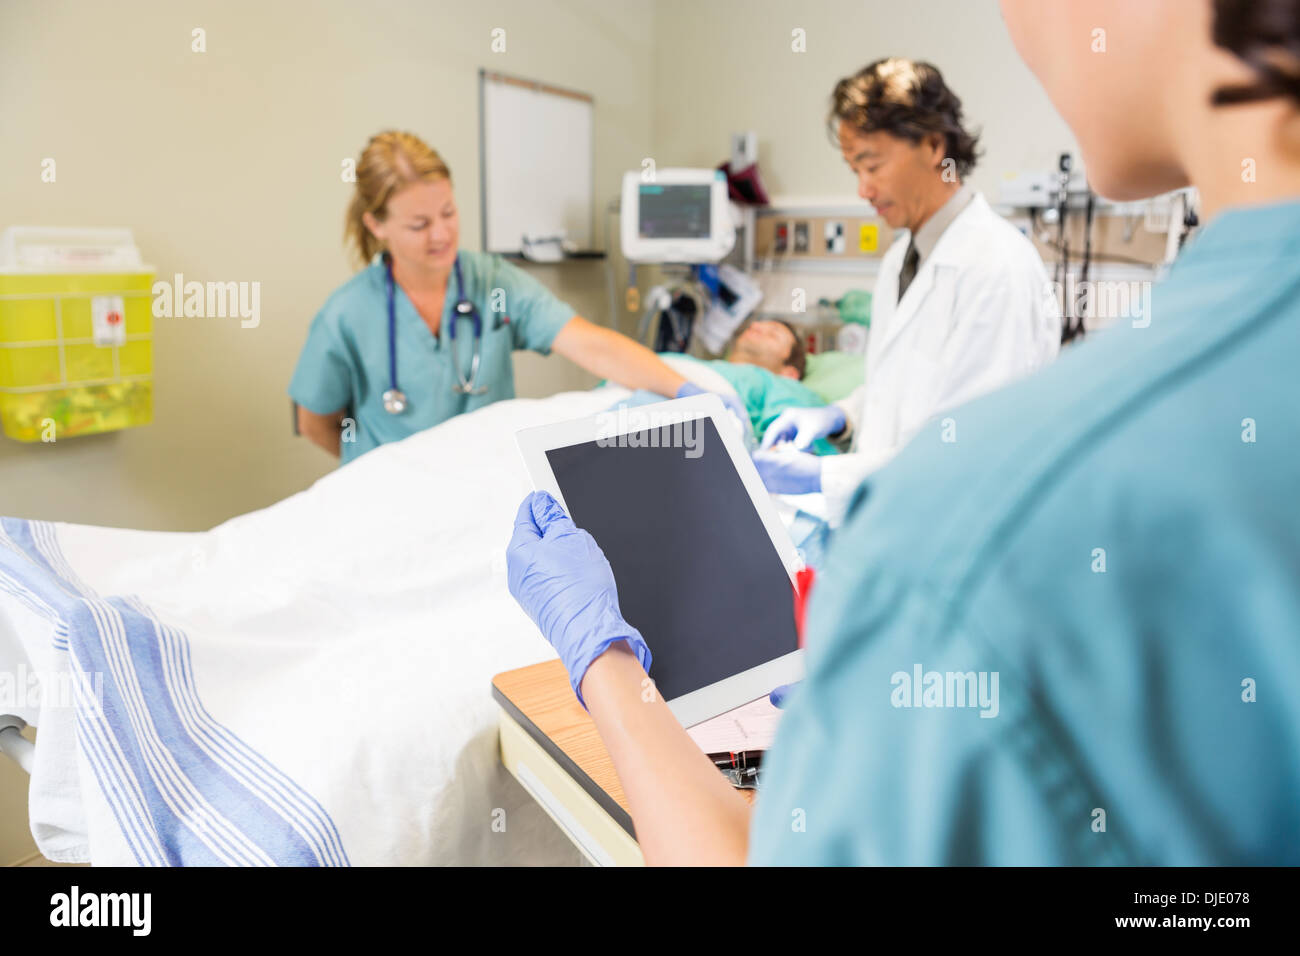 Nurse Holding Digital Tablet While Doctor And Colleague Treating Stock Photo